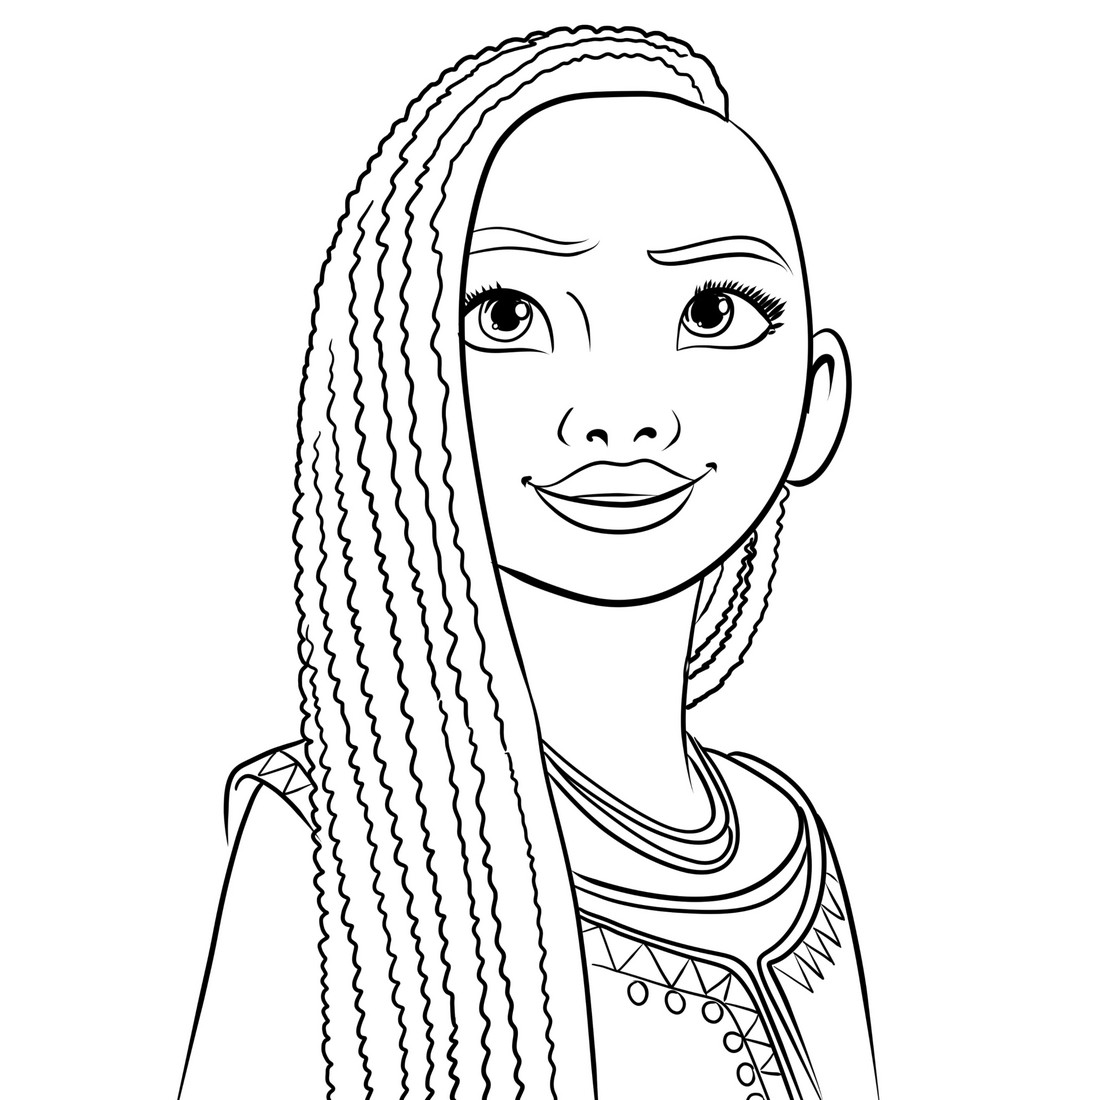 Asha from Wish (Walt Disney Pictures) coloring page to print and color